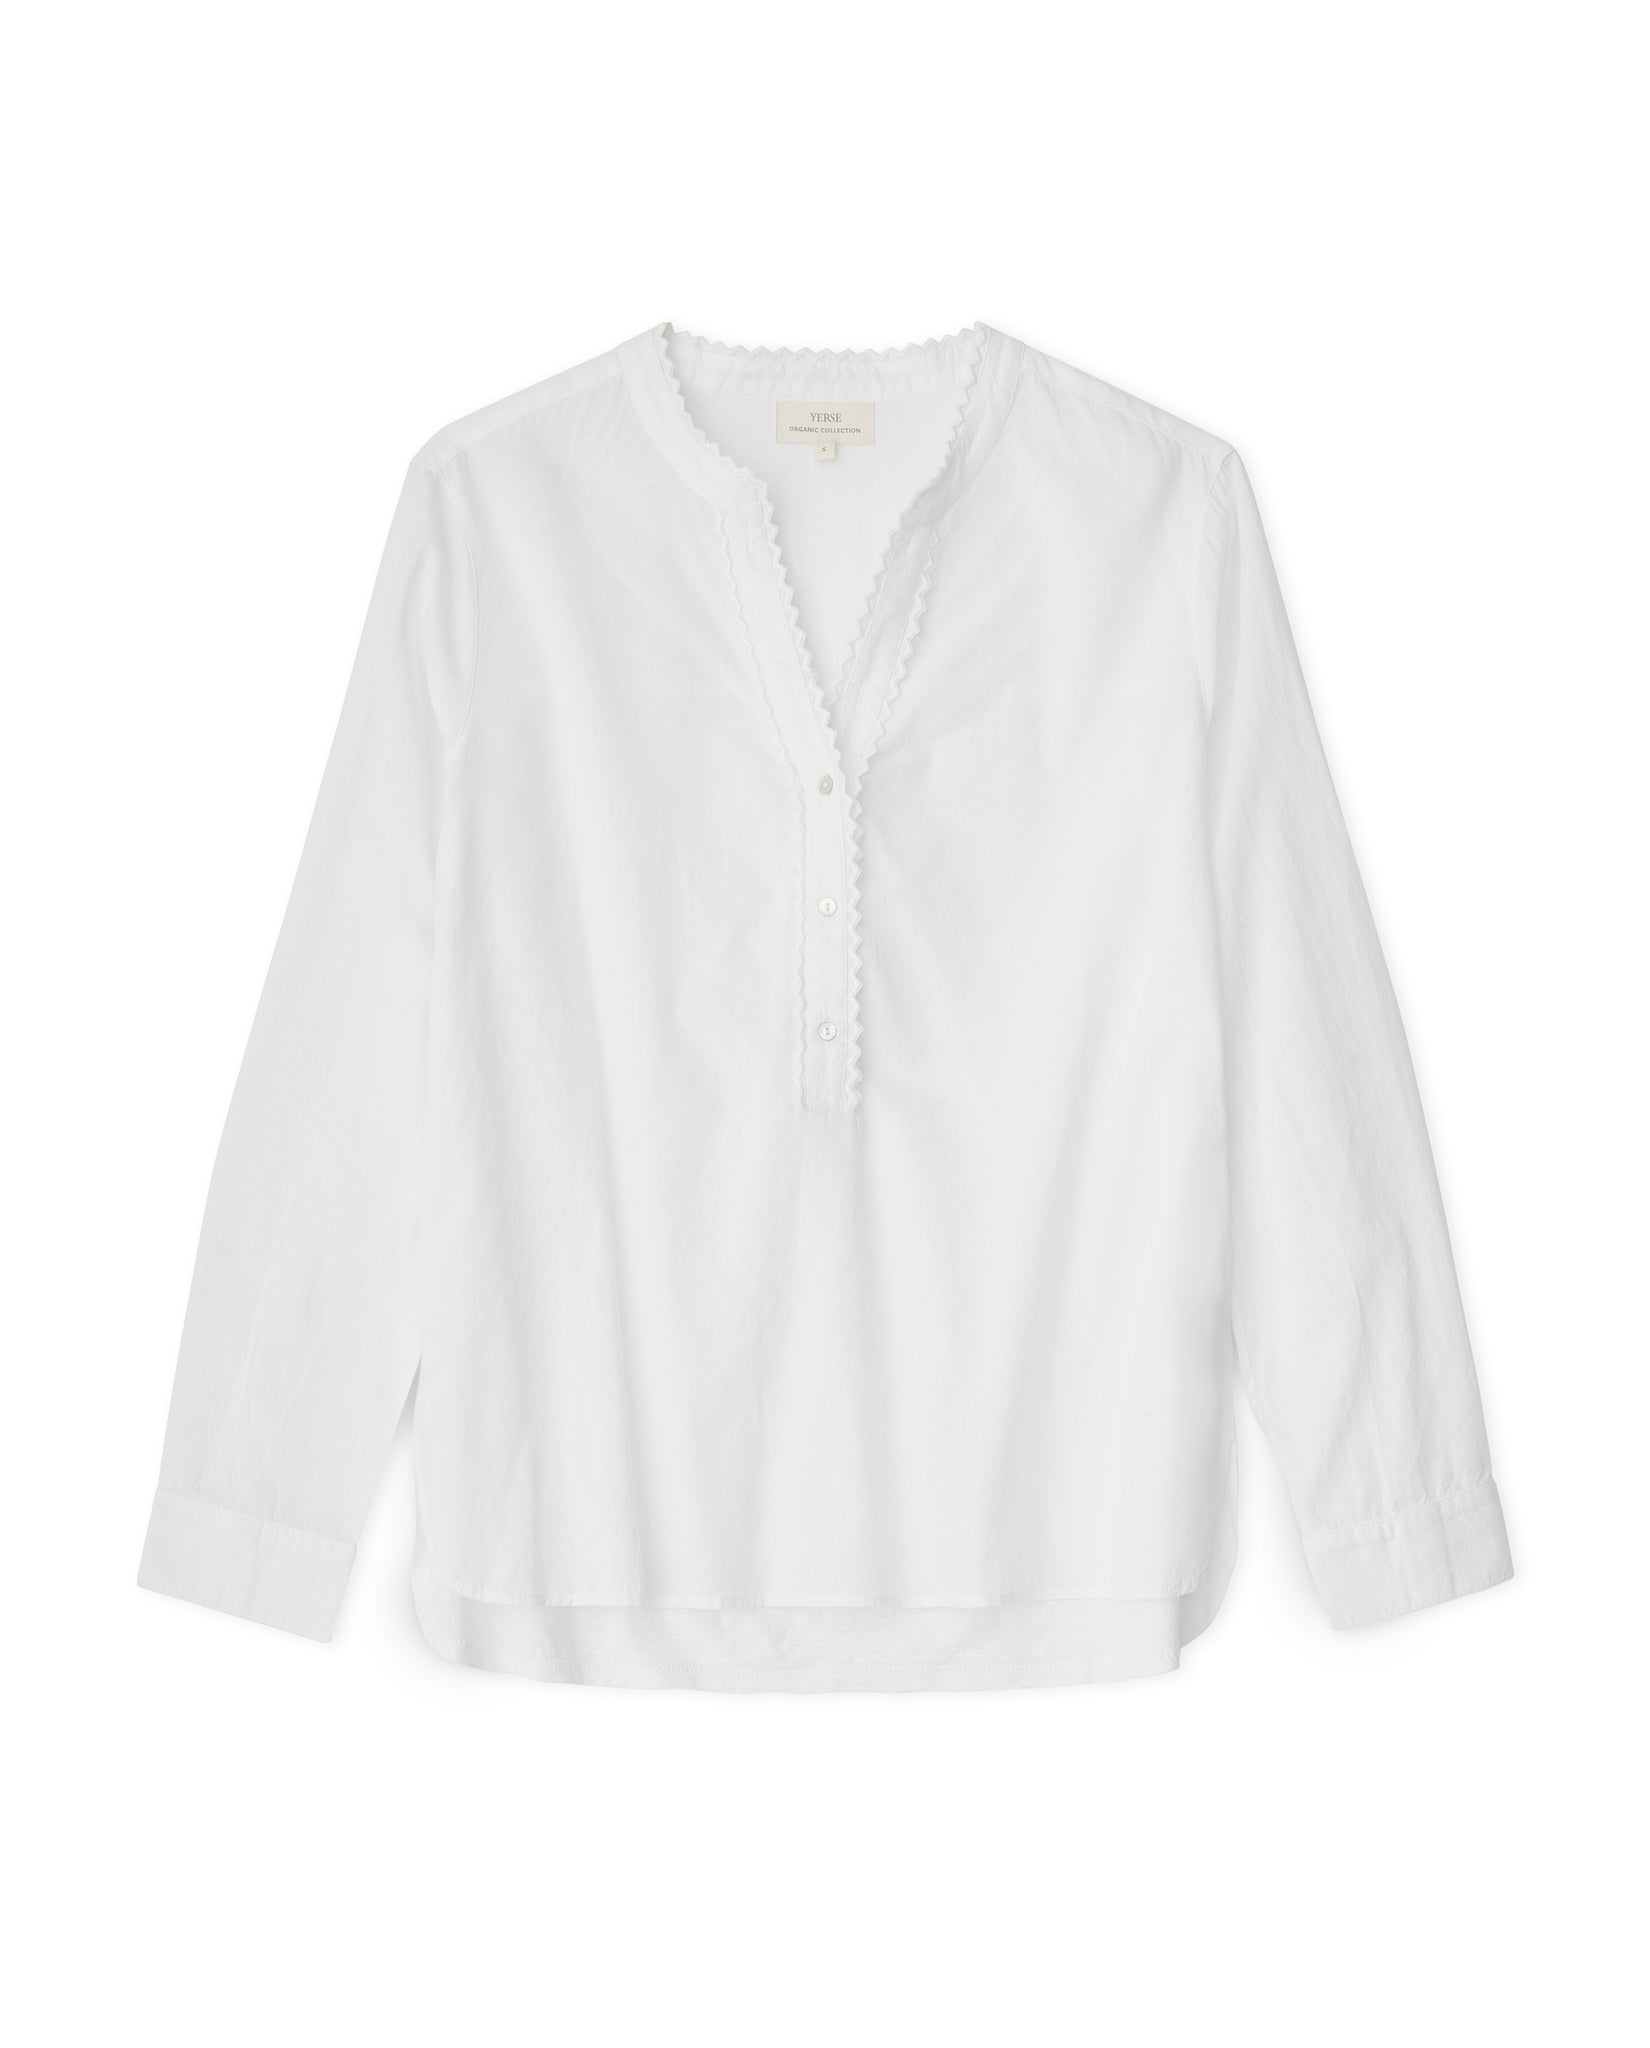 Yerse Long Sleeve Organic Cotton T-shirt With Buttons, White